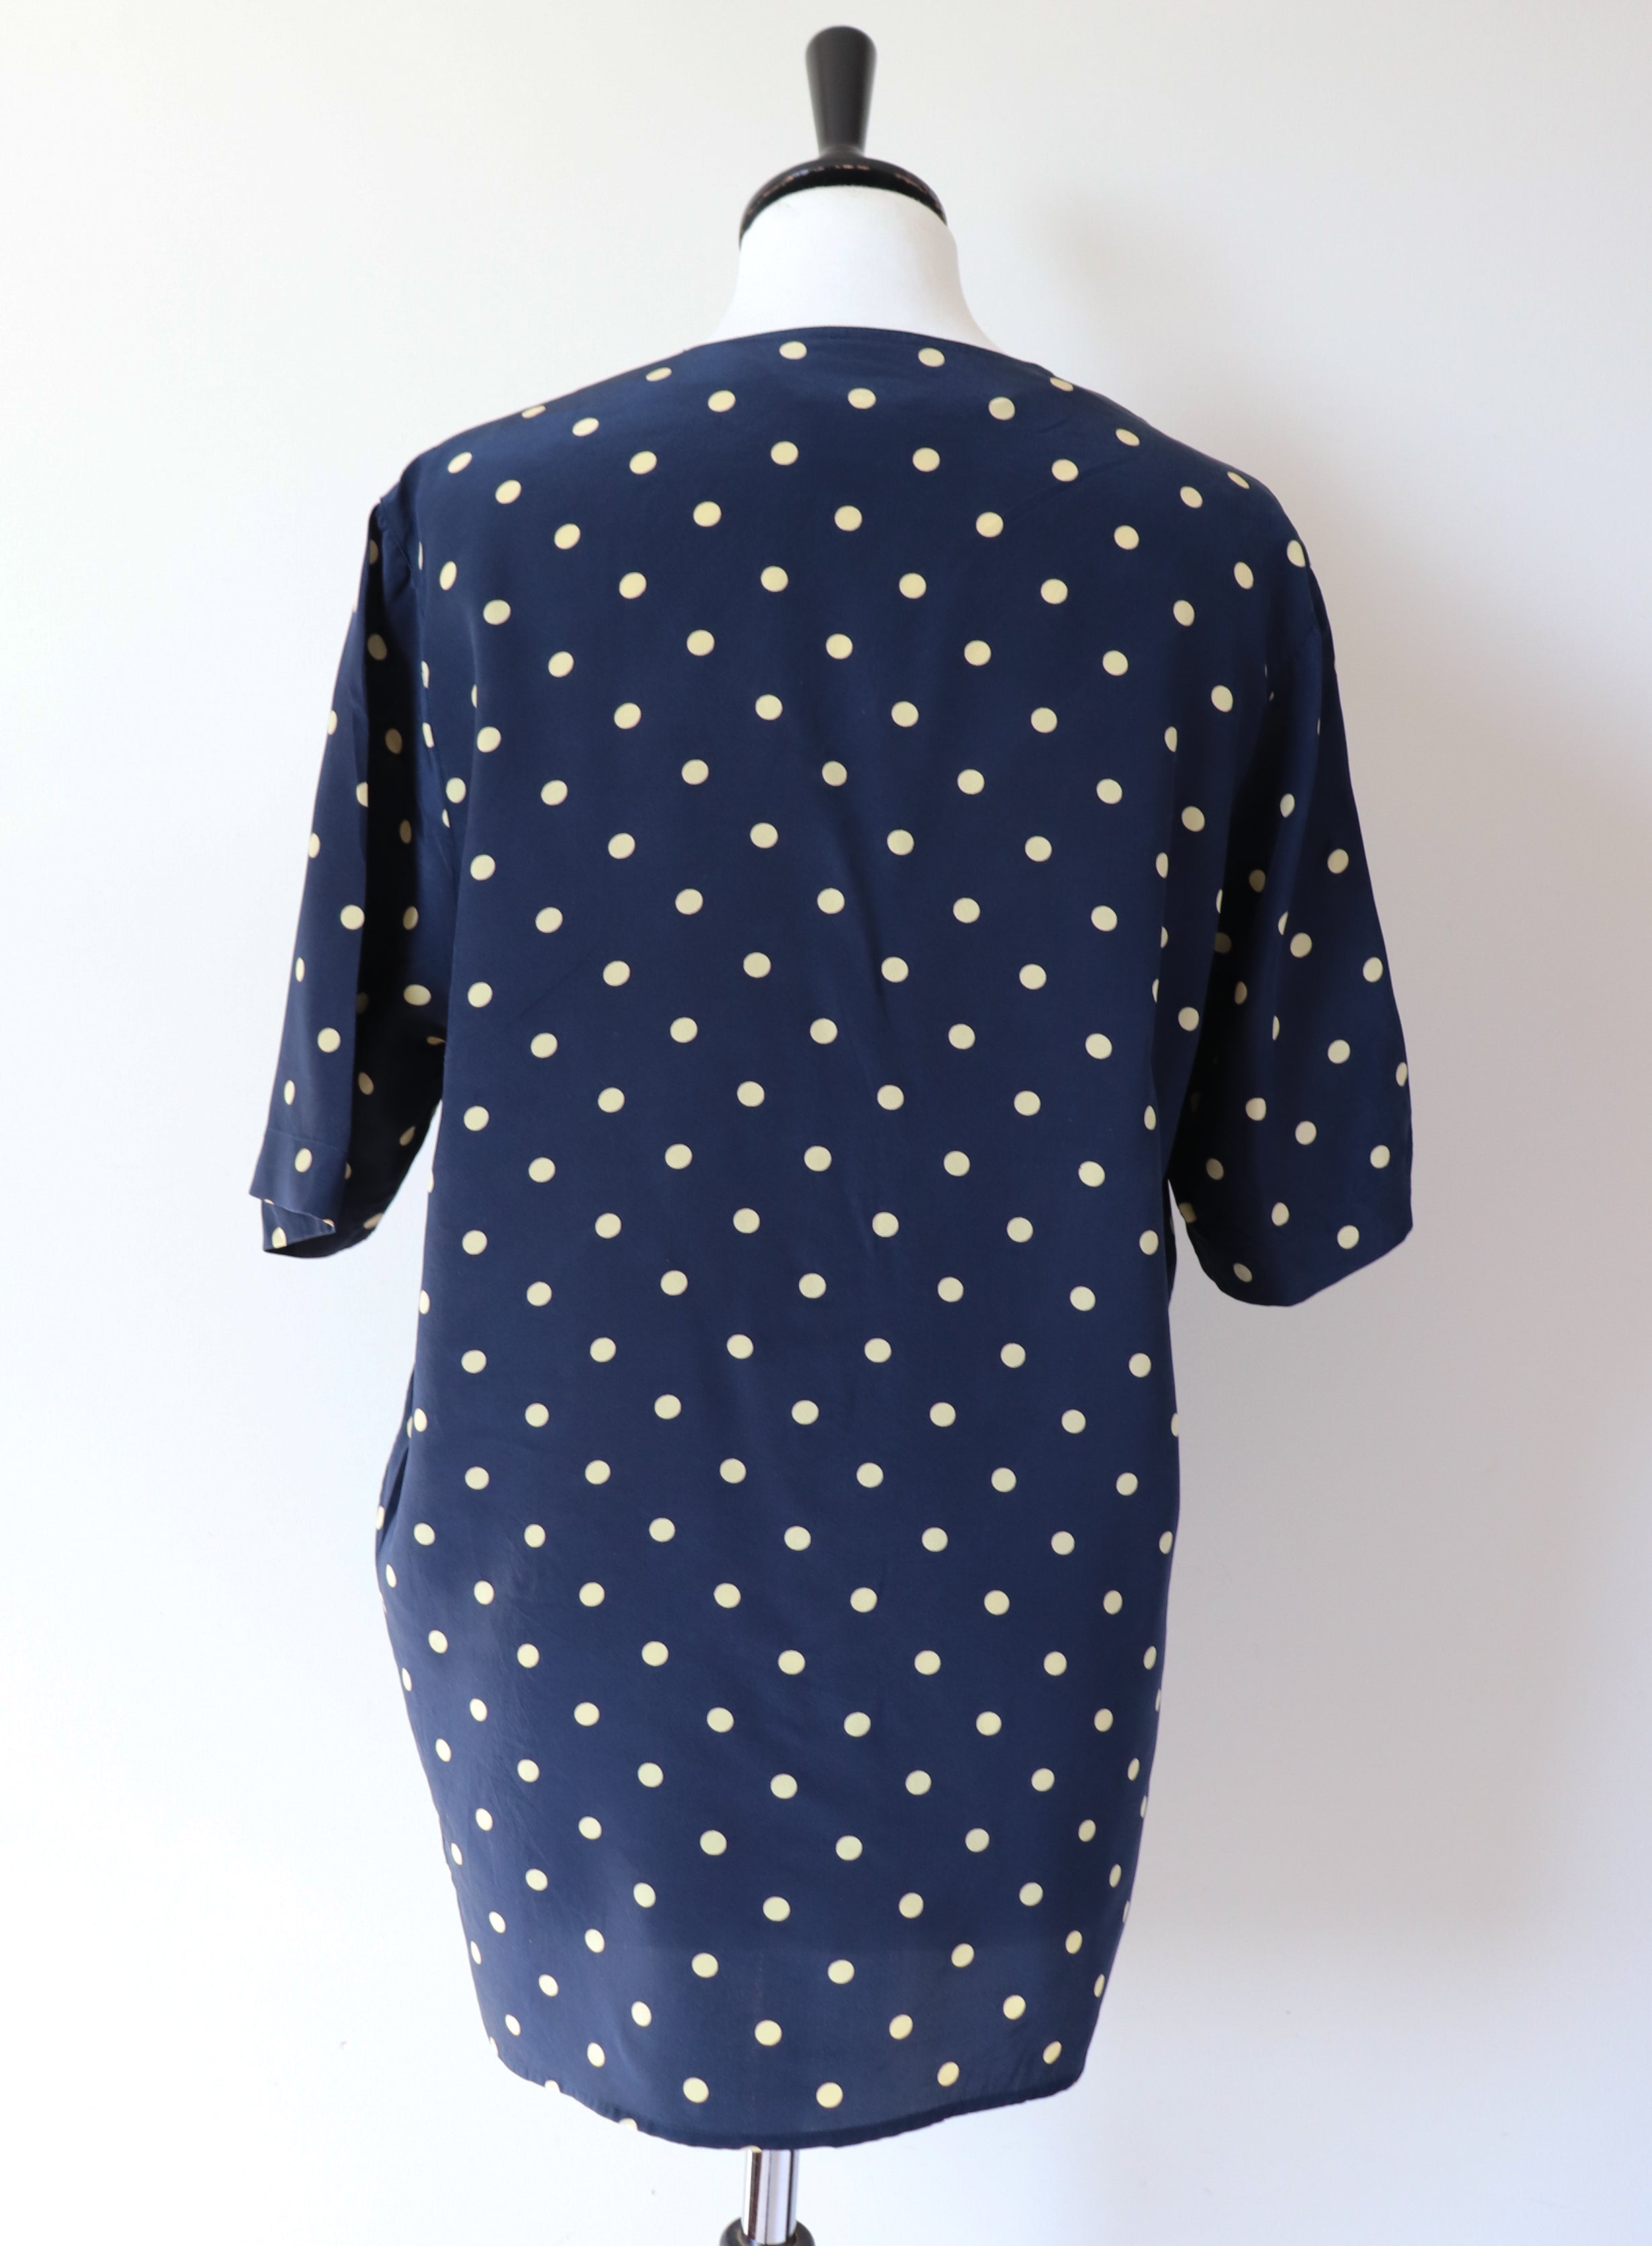 Silk Spotted Tunic Top - Short Sleeve Blouse - Fit M - UK 12